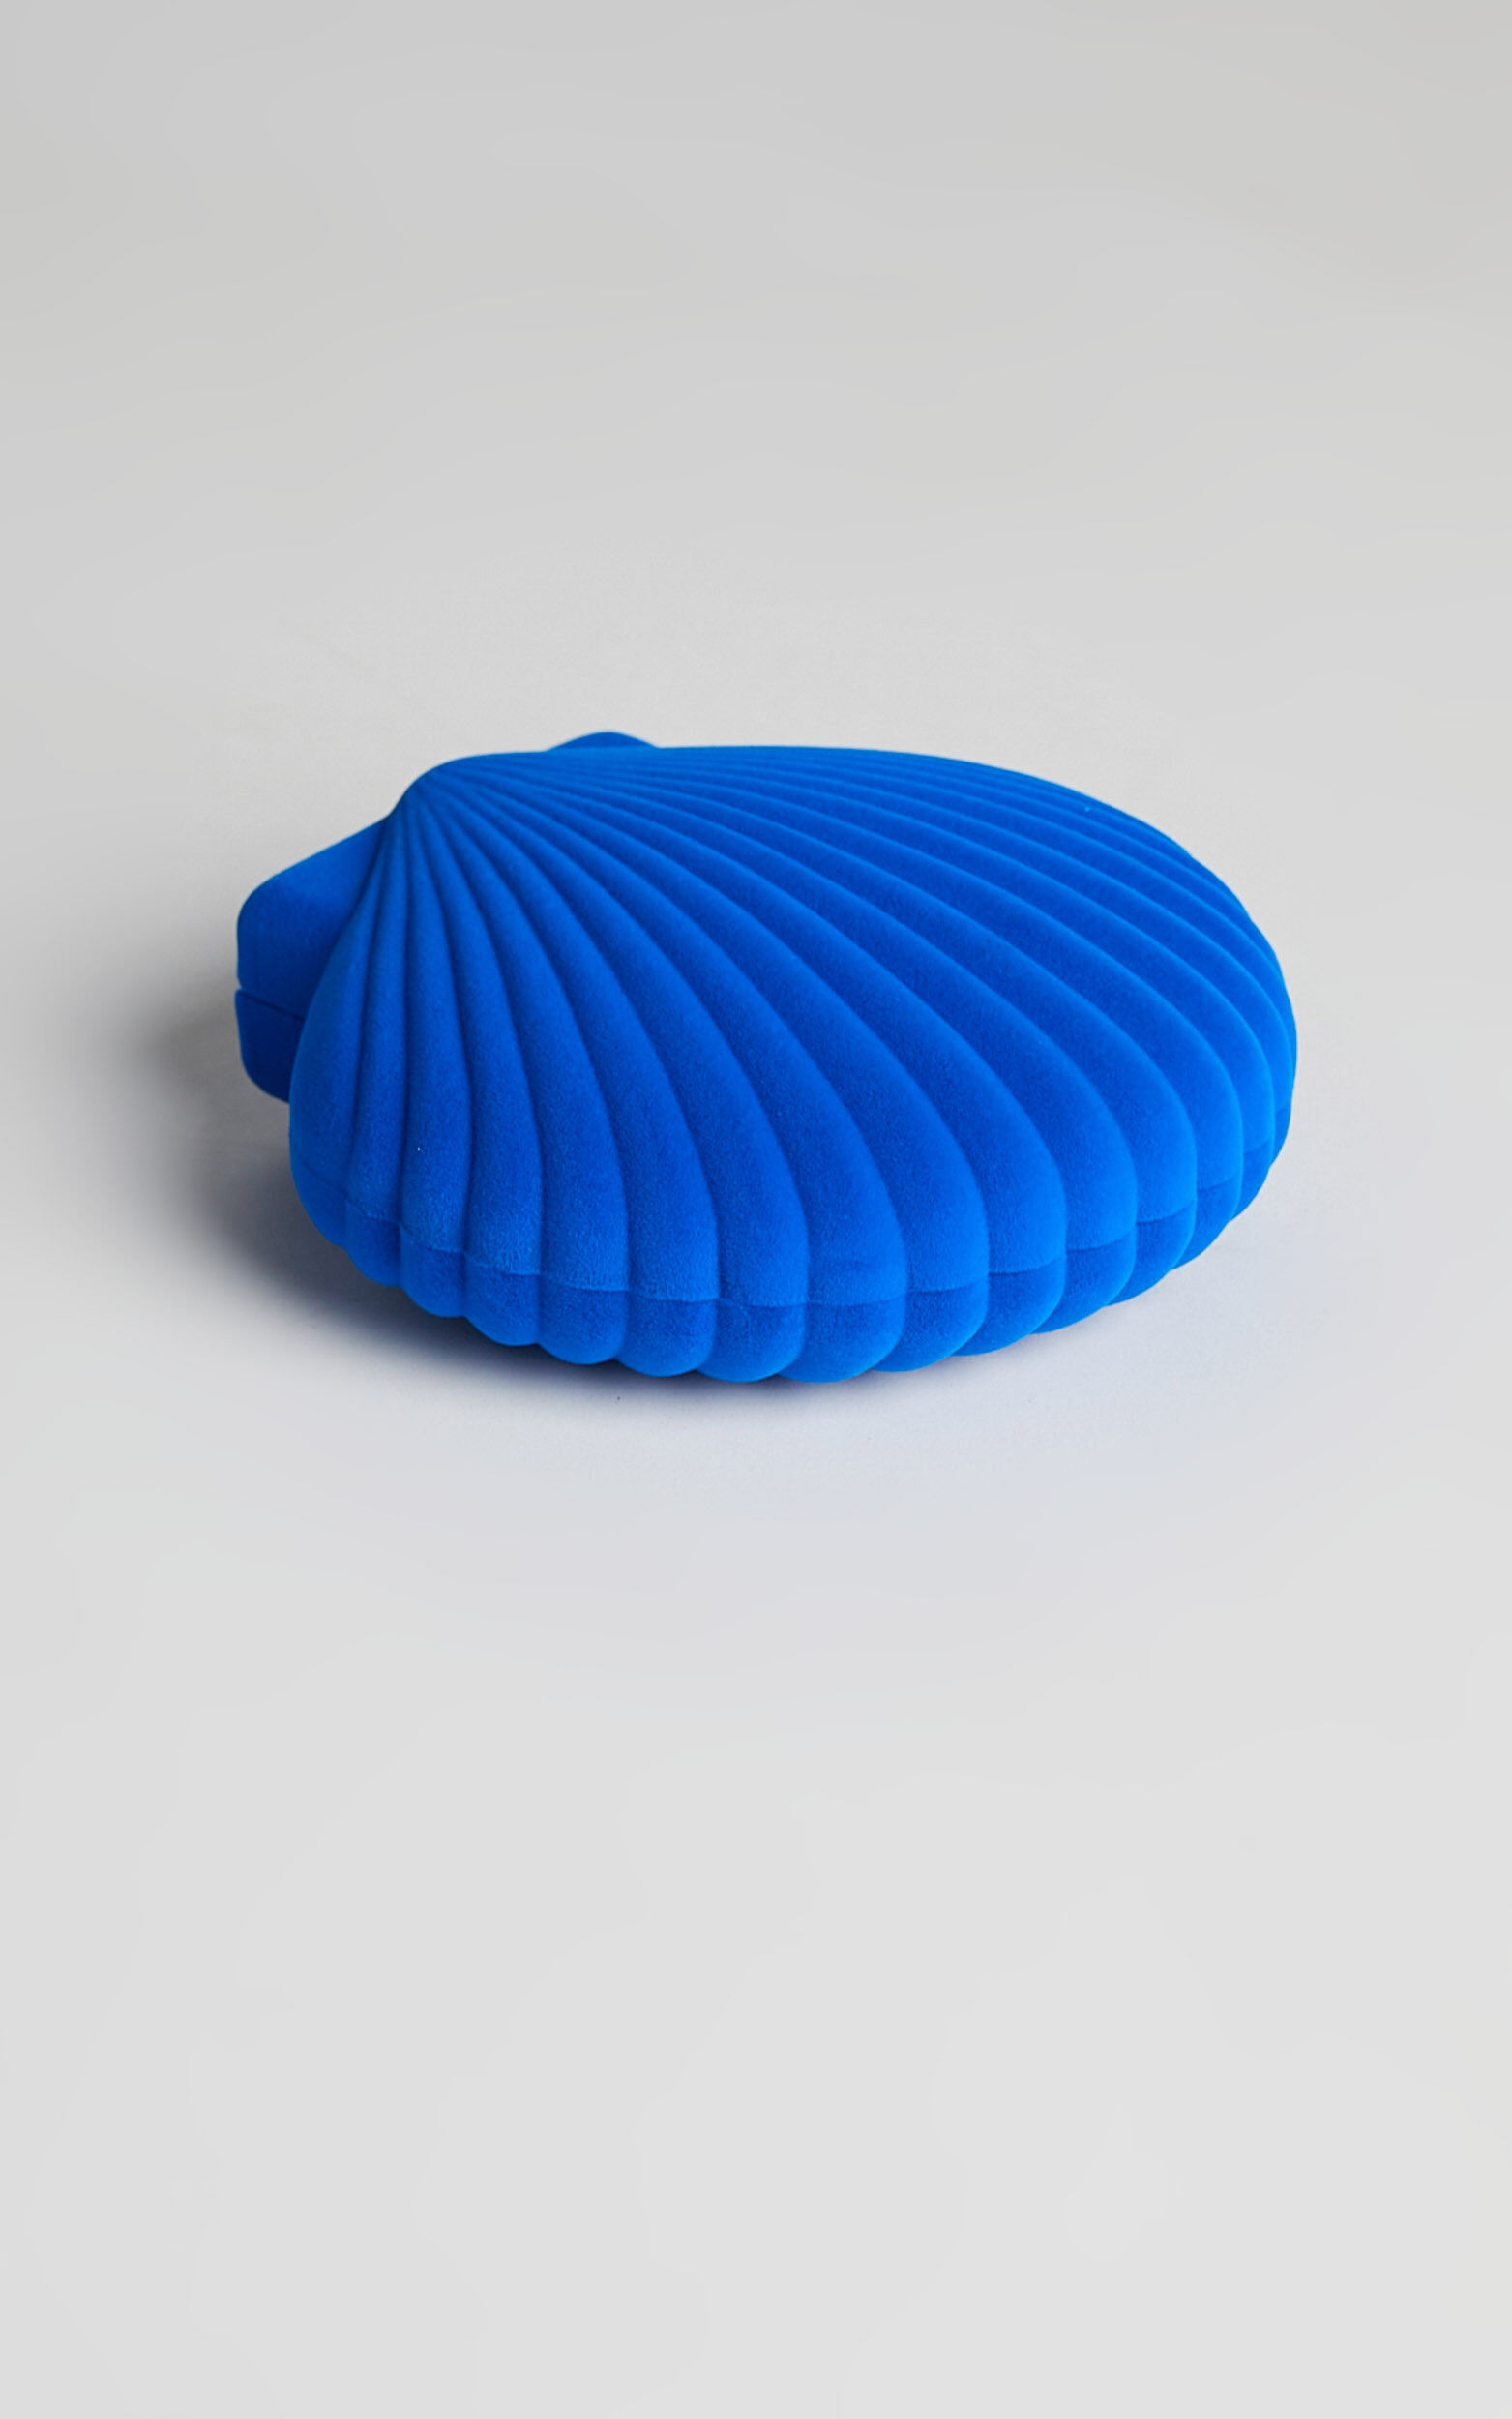 DOIY - Venus Shell Jewellery Box in Blue - NoSize, BLU1, super-hi-res image number null